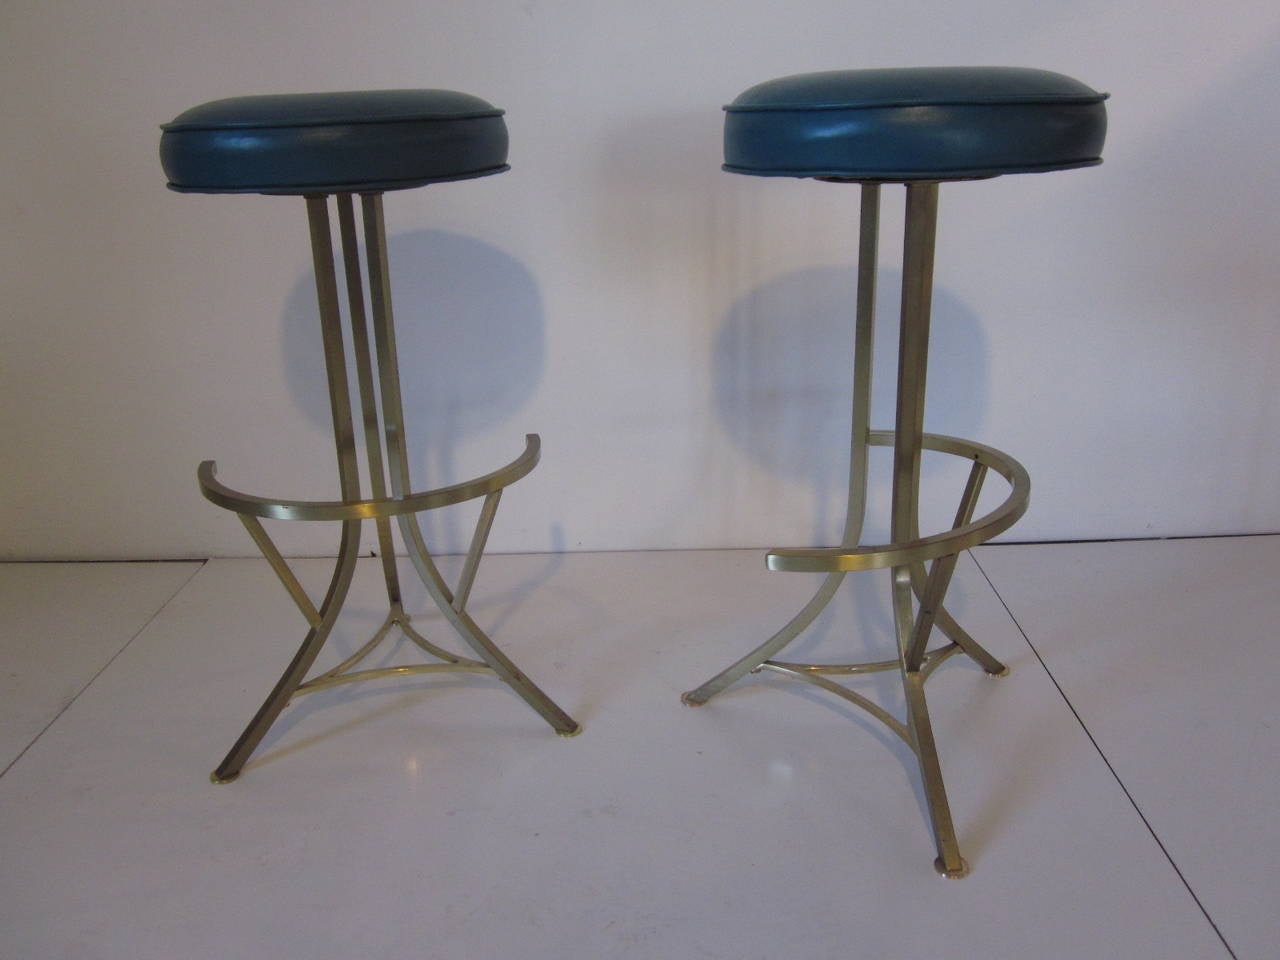 A pair of solid brass bar stools with half moon crescent shaped foot rests, brass foot pads and upholstered swiveling round cushion with big brass button . In a dark teal toned turquoise leatherette with the cushion dia. 13.50